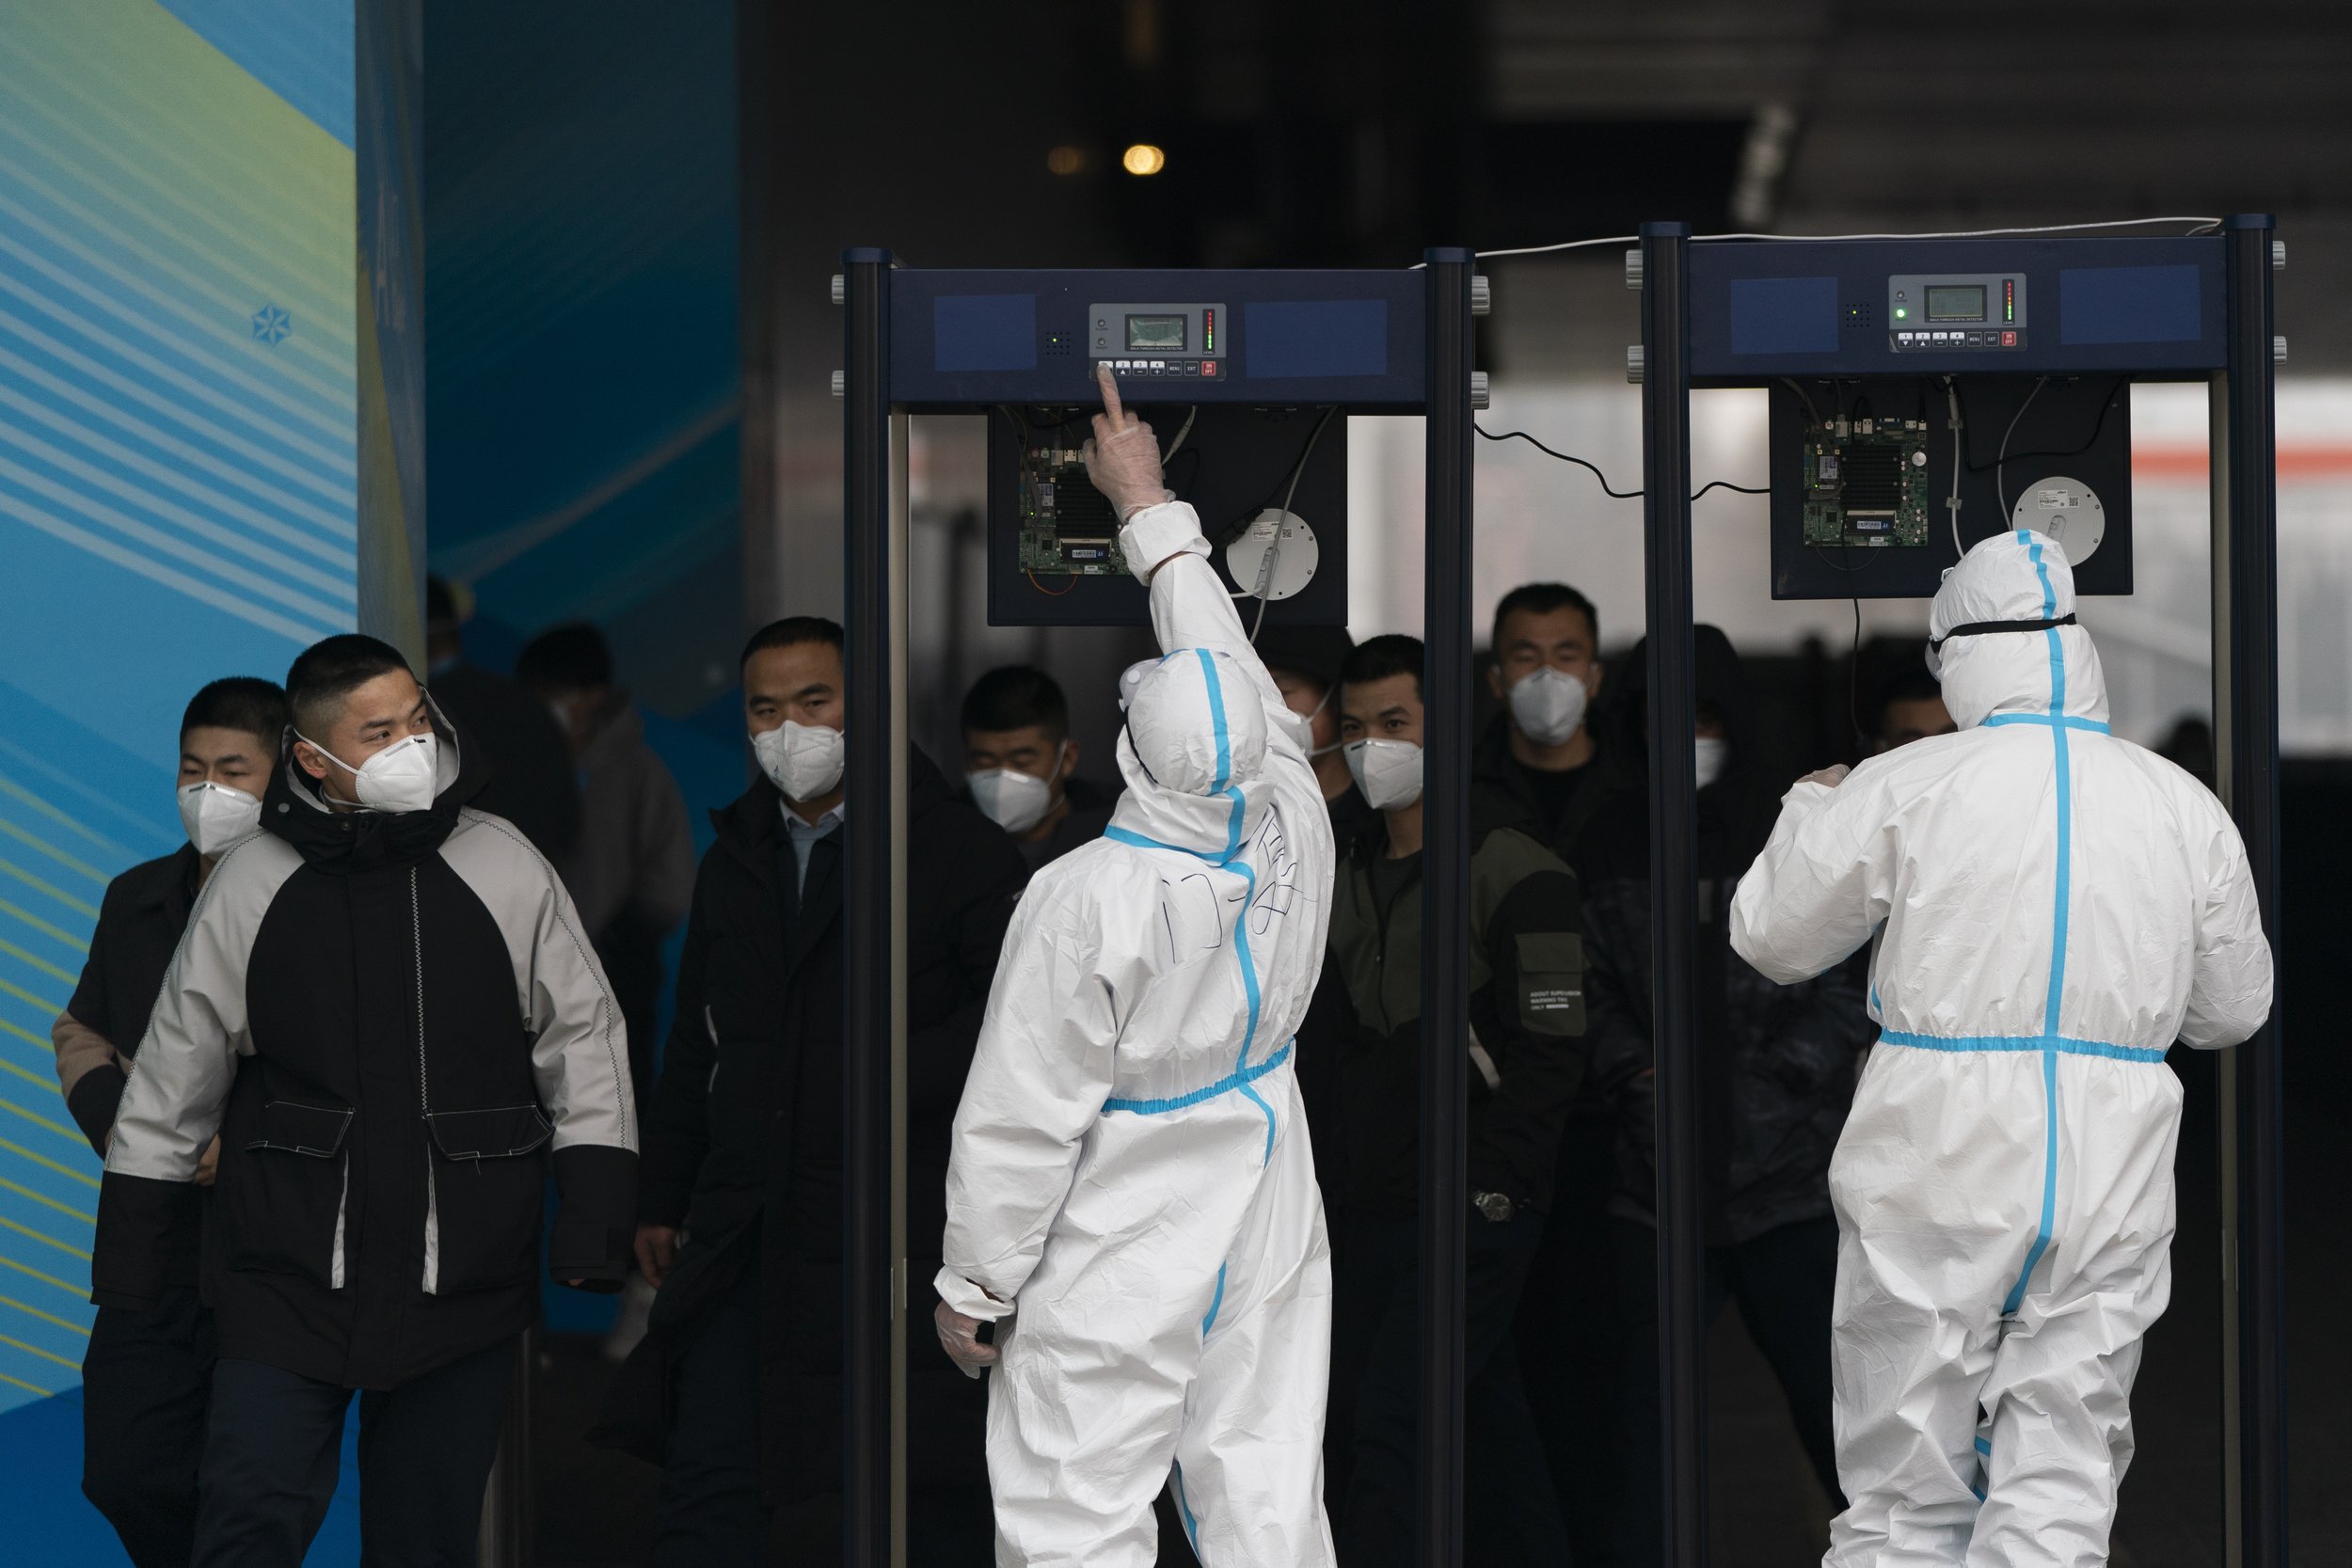  Two security personnel in protective gear set up metal detectors at the main media center at the 2022 Winter Olympics, Monday, Jan. 24, 2022, in Beijing. (AP Photo/Jae C. Hong) 